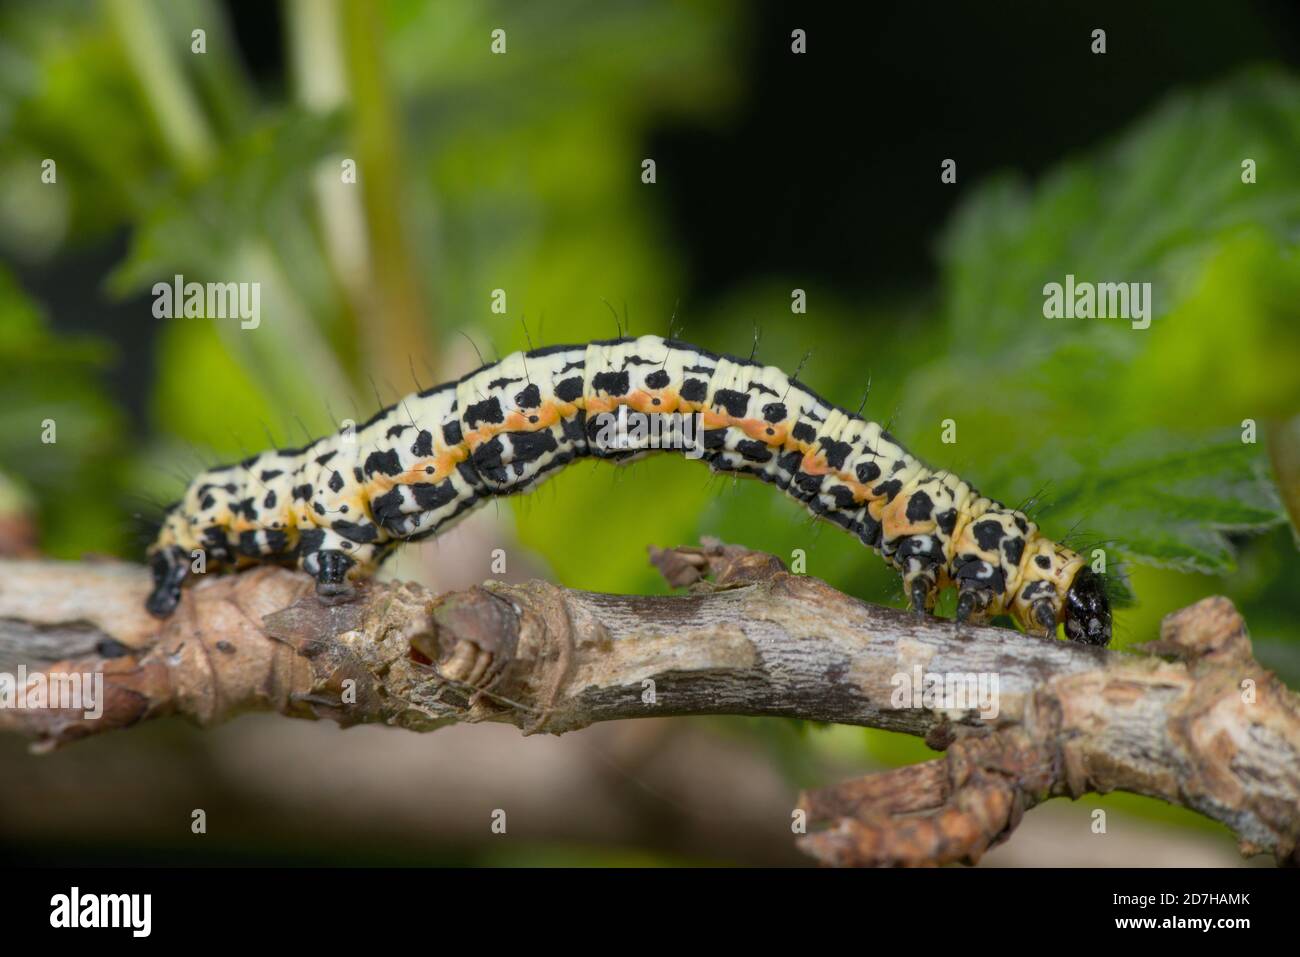 Magpie moth, Currant moth (Abraxas grossulariata), caterpillar on a twig, side view, Germany Stock Photo